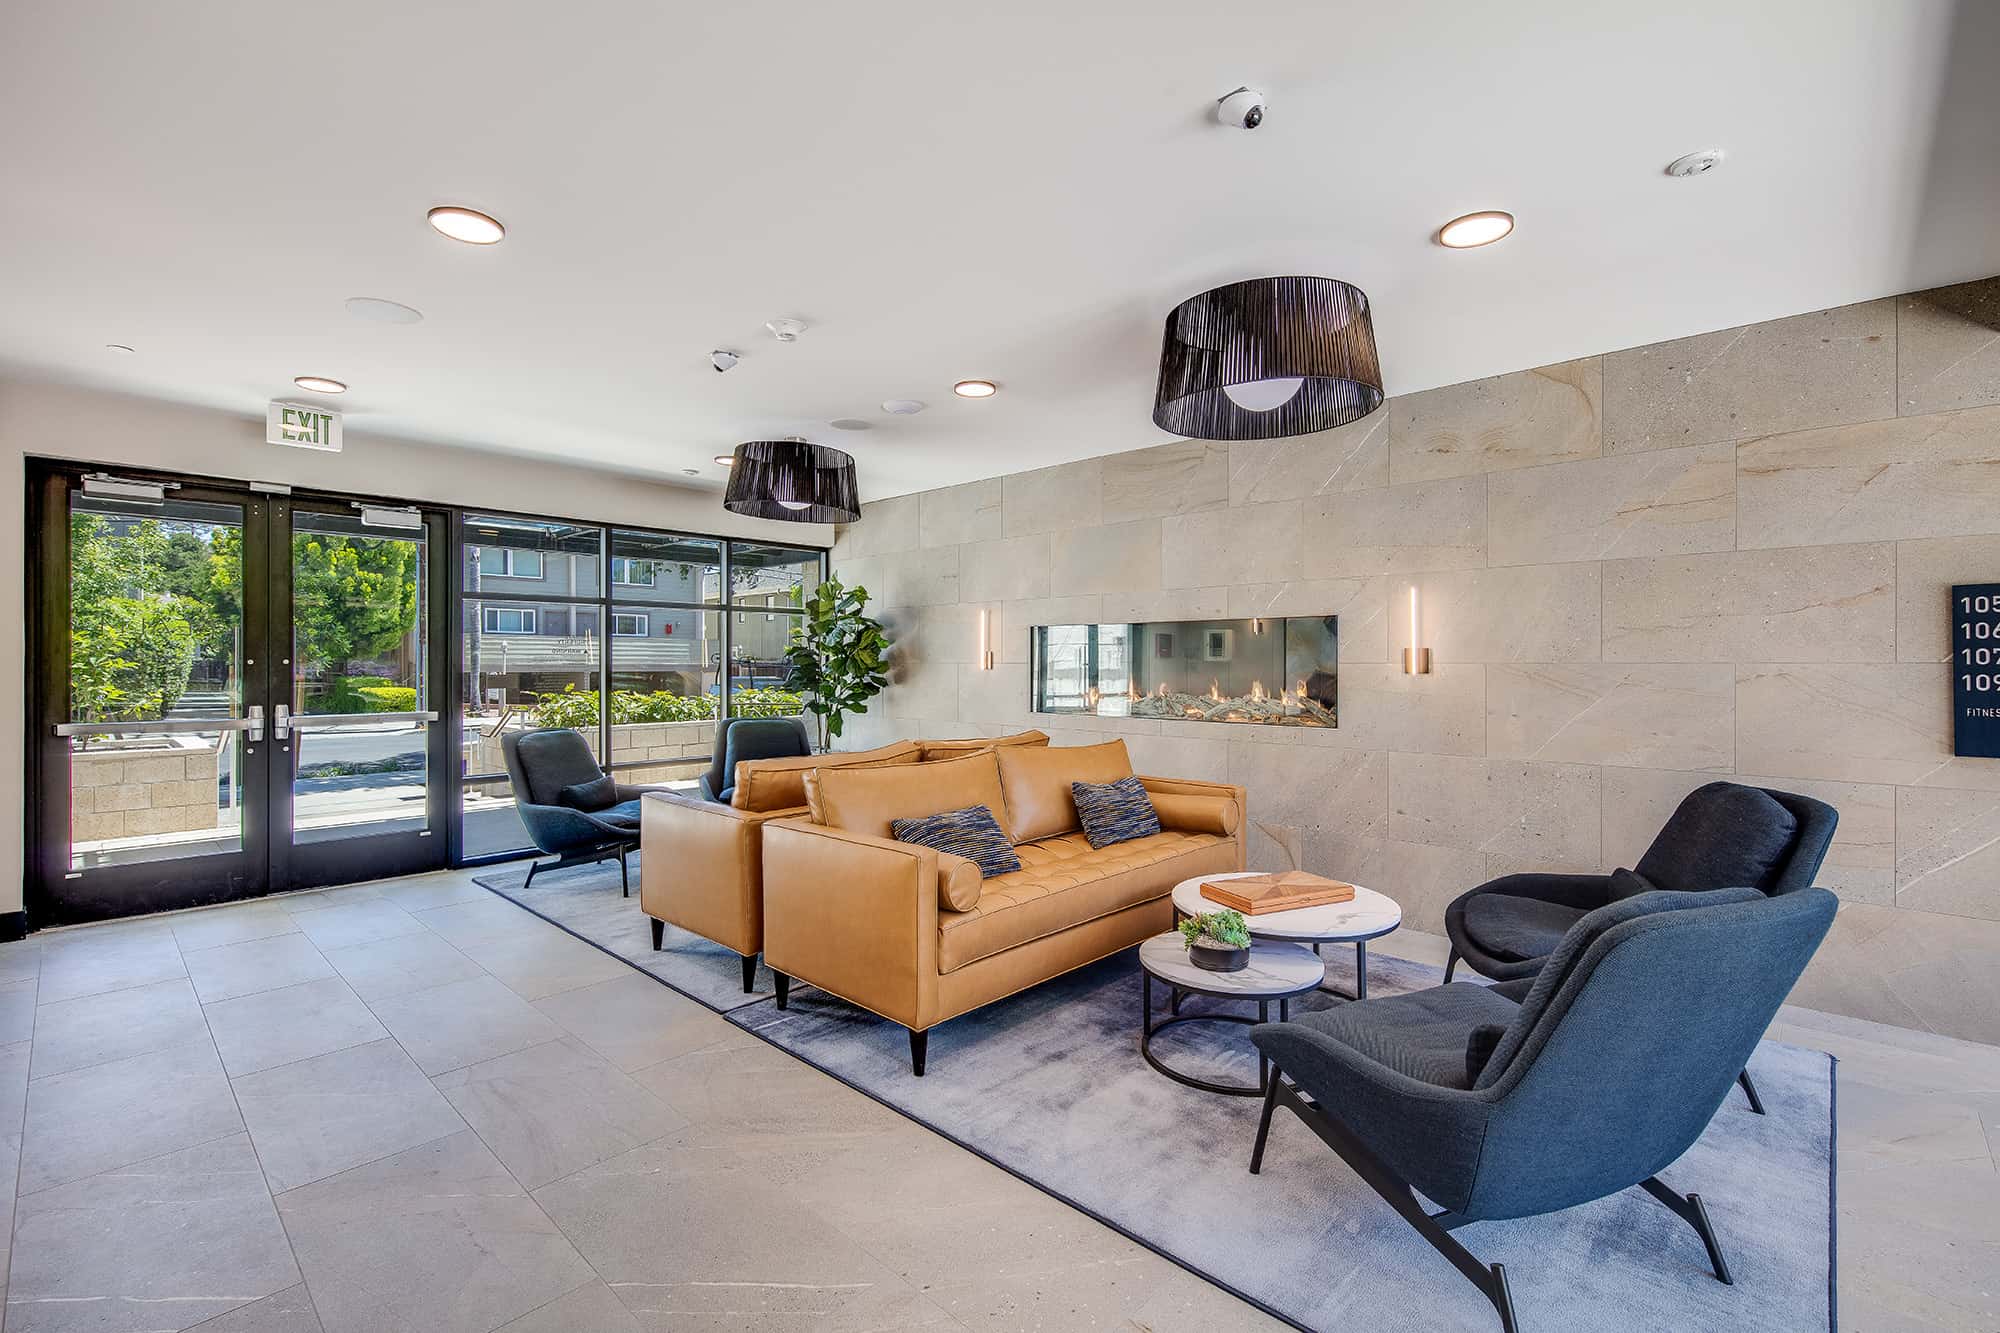 Luxury Apartments in Menlo Park CA - Realm - Private Entry Lounge With Stylish Furniture, a Fireplace, and Floor to Ceiling Windows